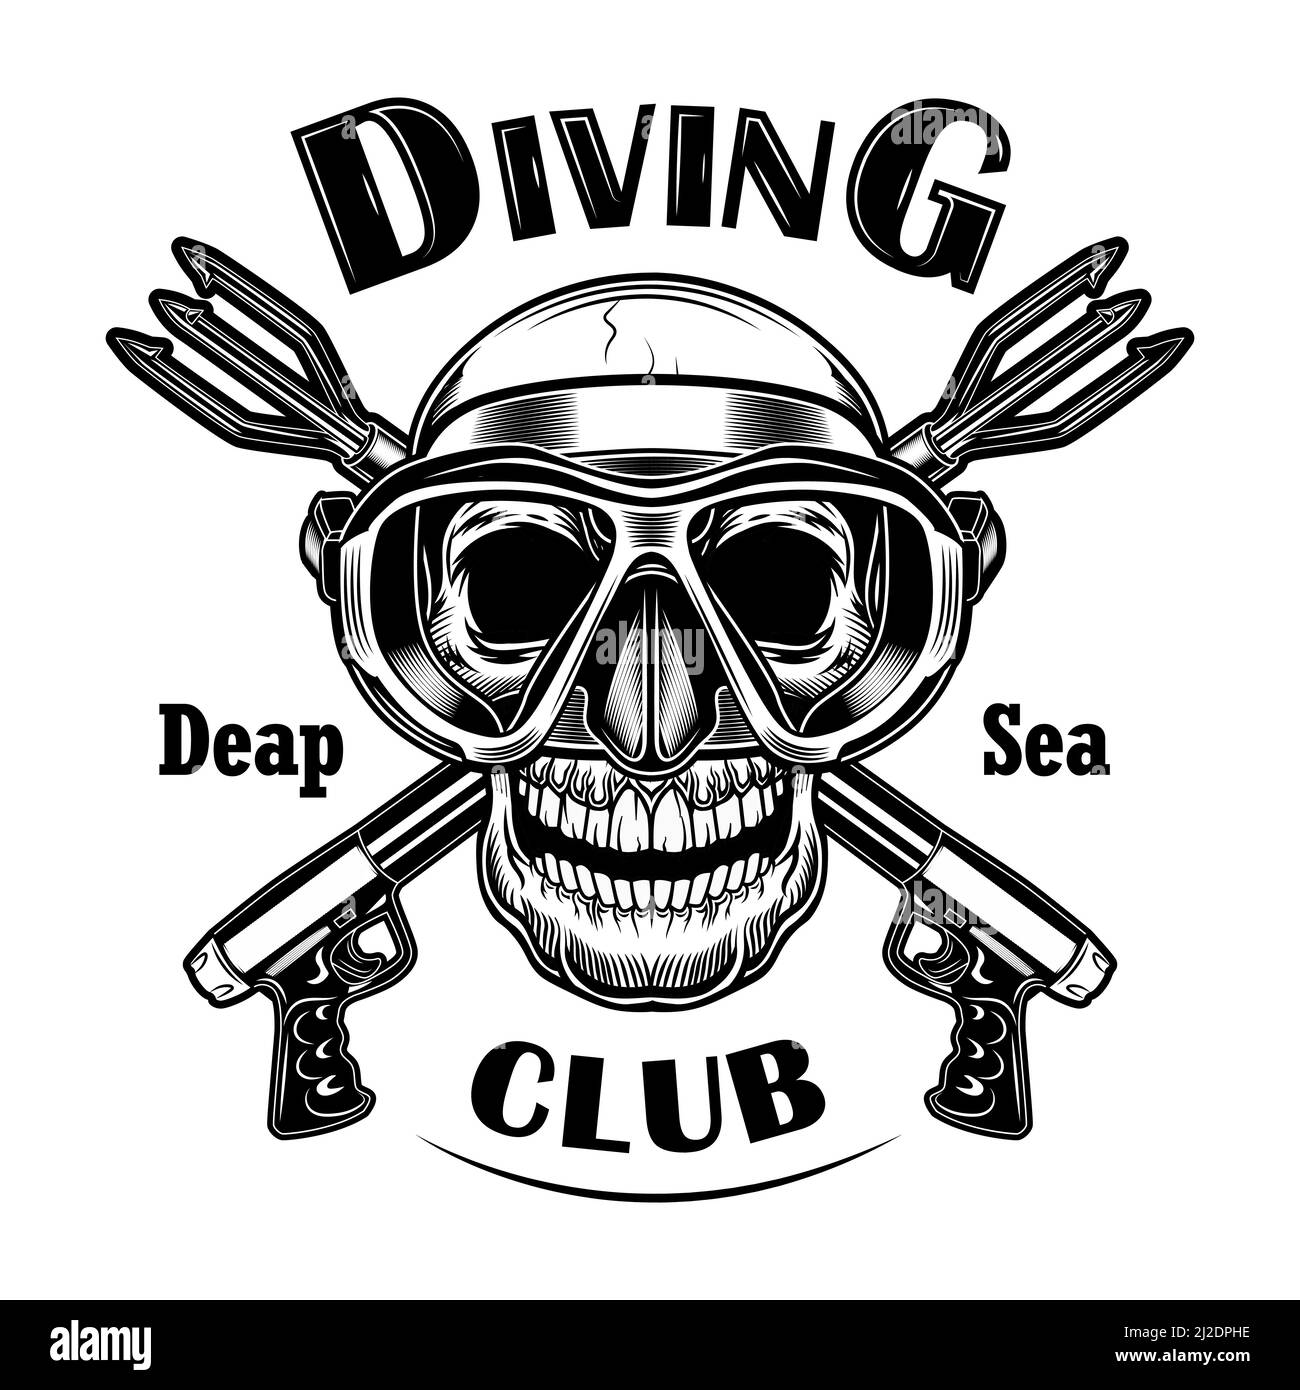 Underwater hunter vector illustration. Skull in mask with crossed stun guns, deep sea text. Seaside activity concept for diving club emblems or labels Stock Vector